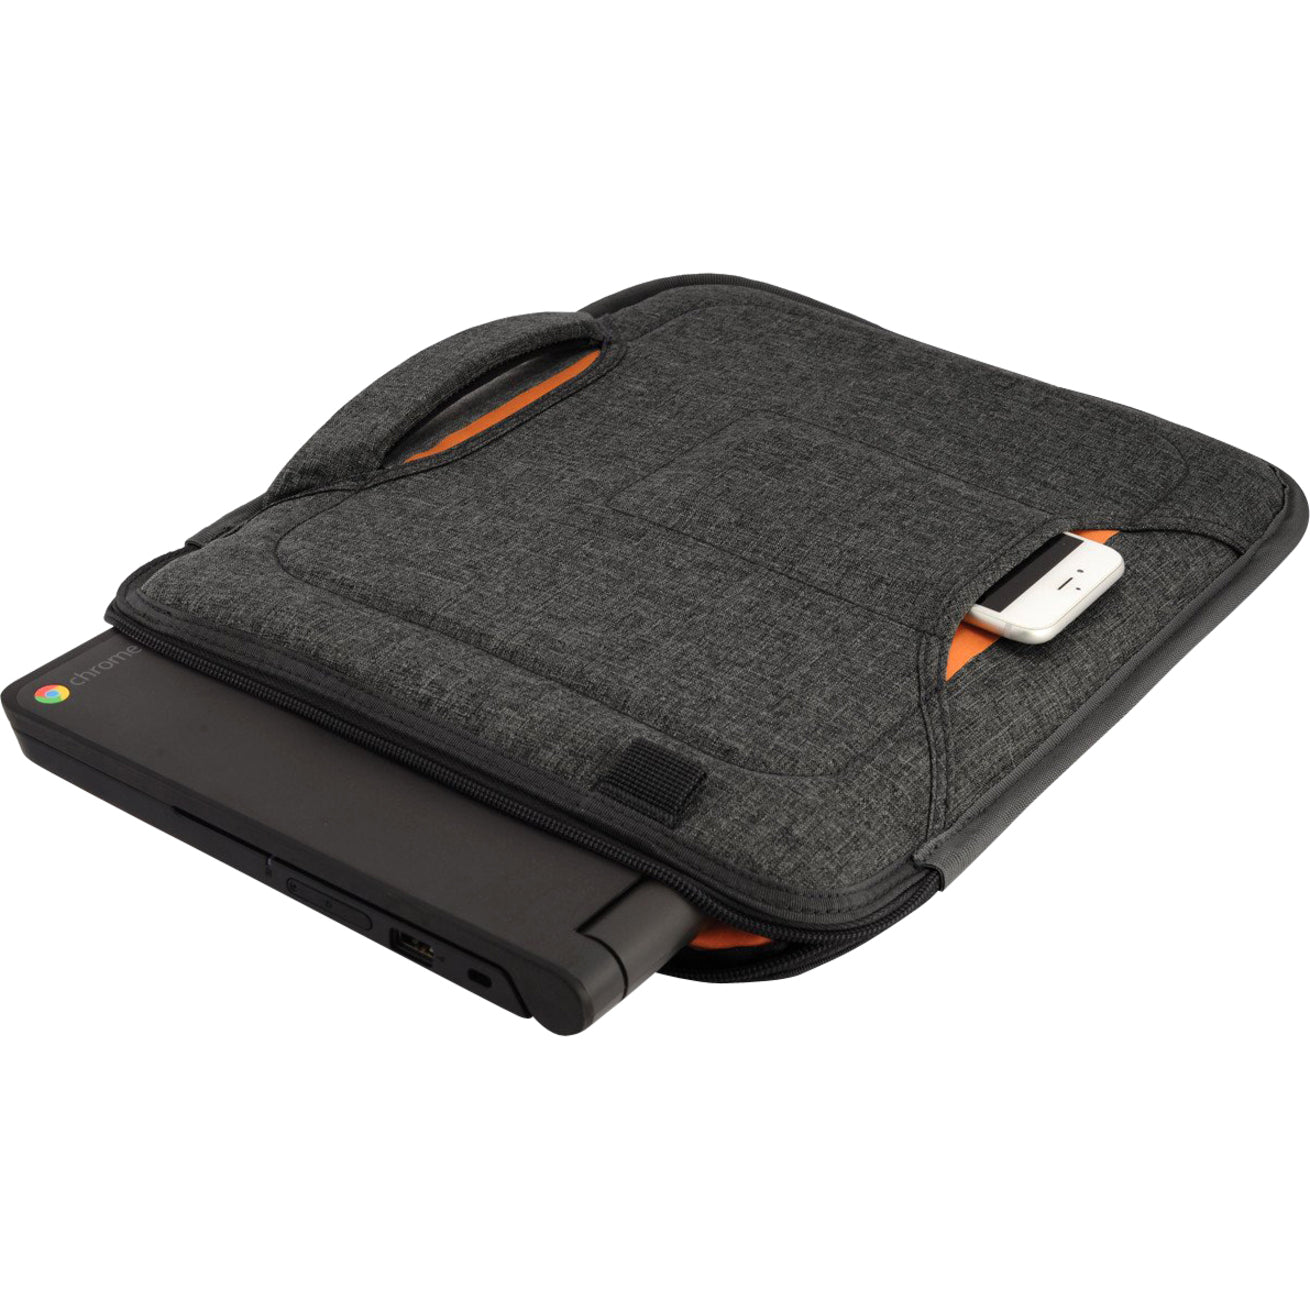 Higher Ground Flak Jacket Carrying Case (Sleeve) for 11" Apple Notebook Chromebook MacBook - Gray